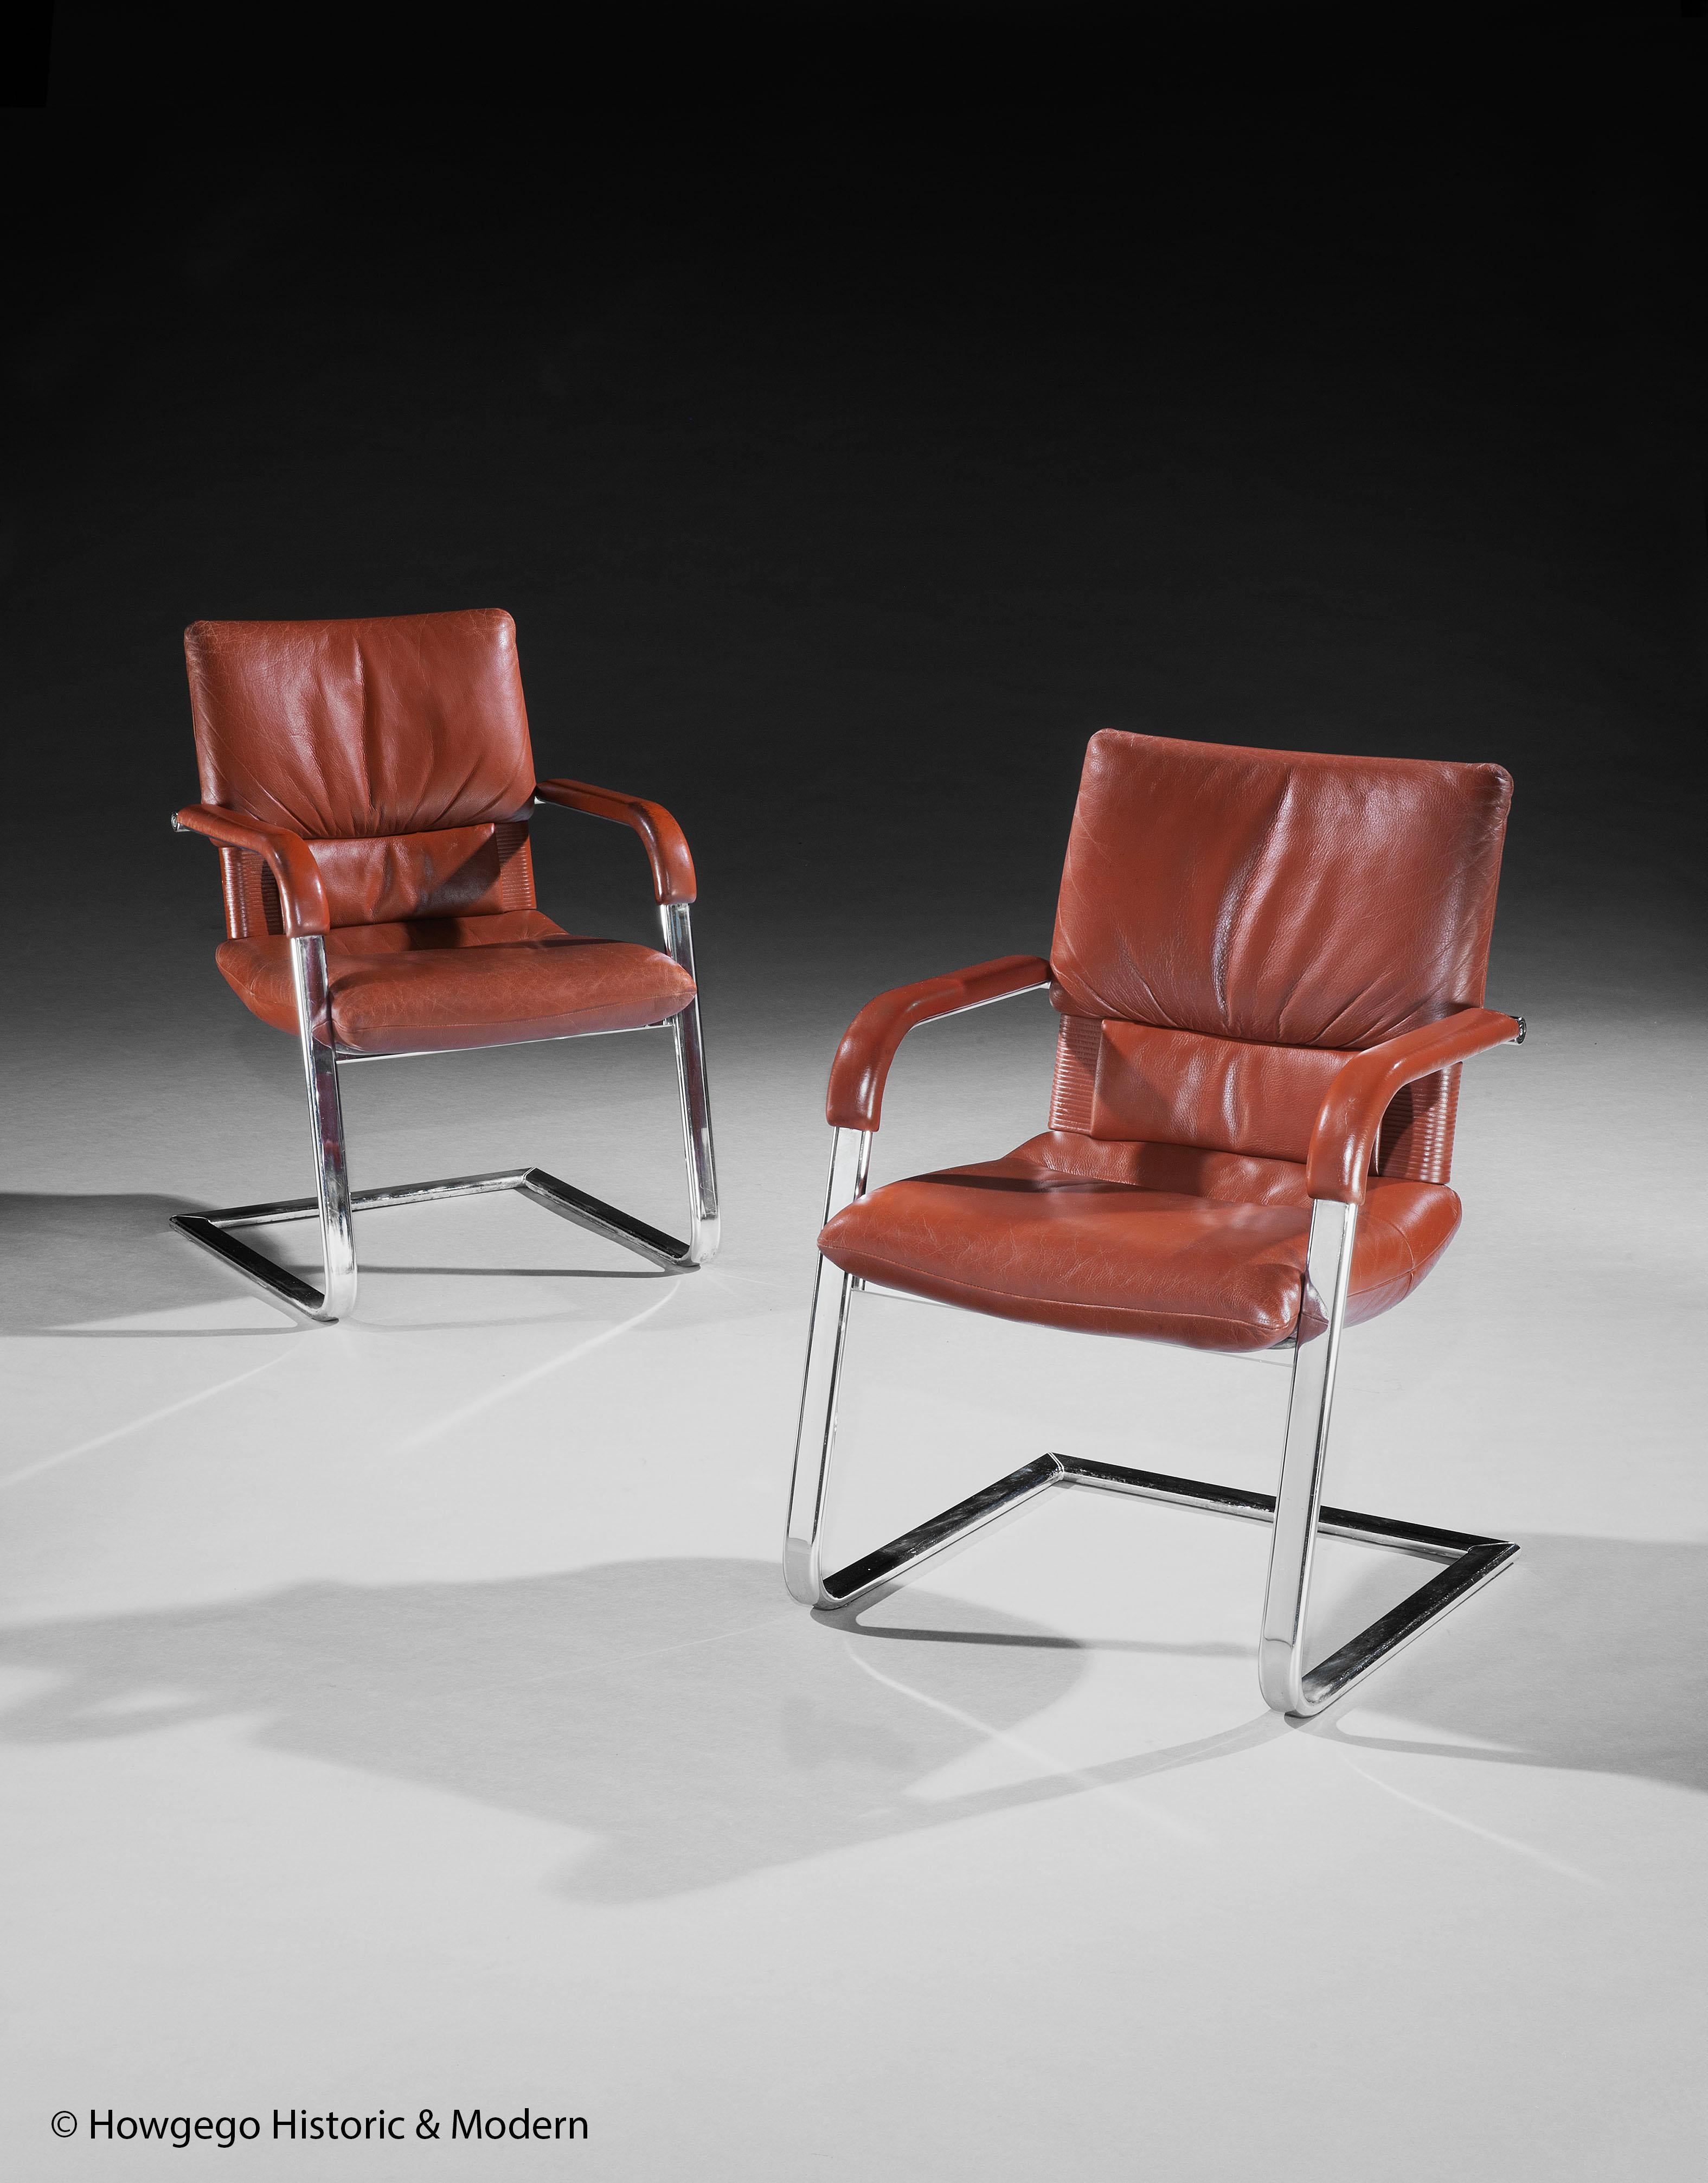 Stylish vintage pair of armchairs for the home or office in the mid-century modern style
Rare survival of vintage office furniture.
Bearing the artists signature which is engraved on a chrome plate along with the Vitra stamp
Extremely comfortable